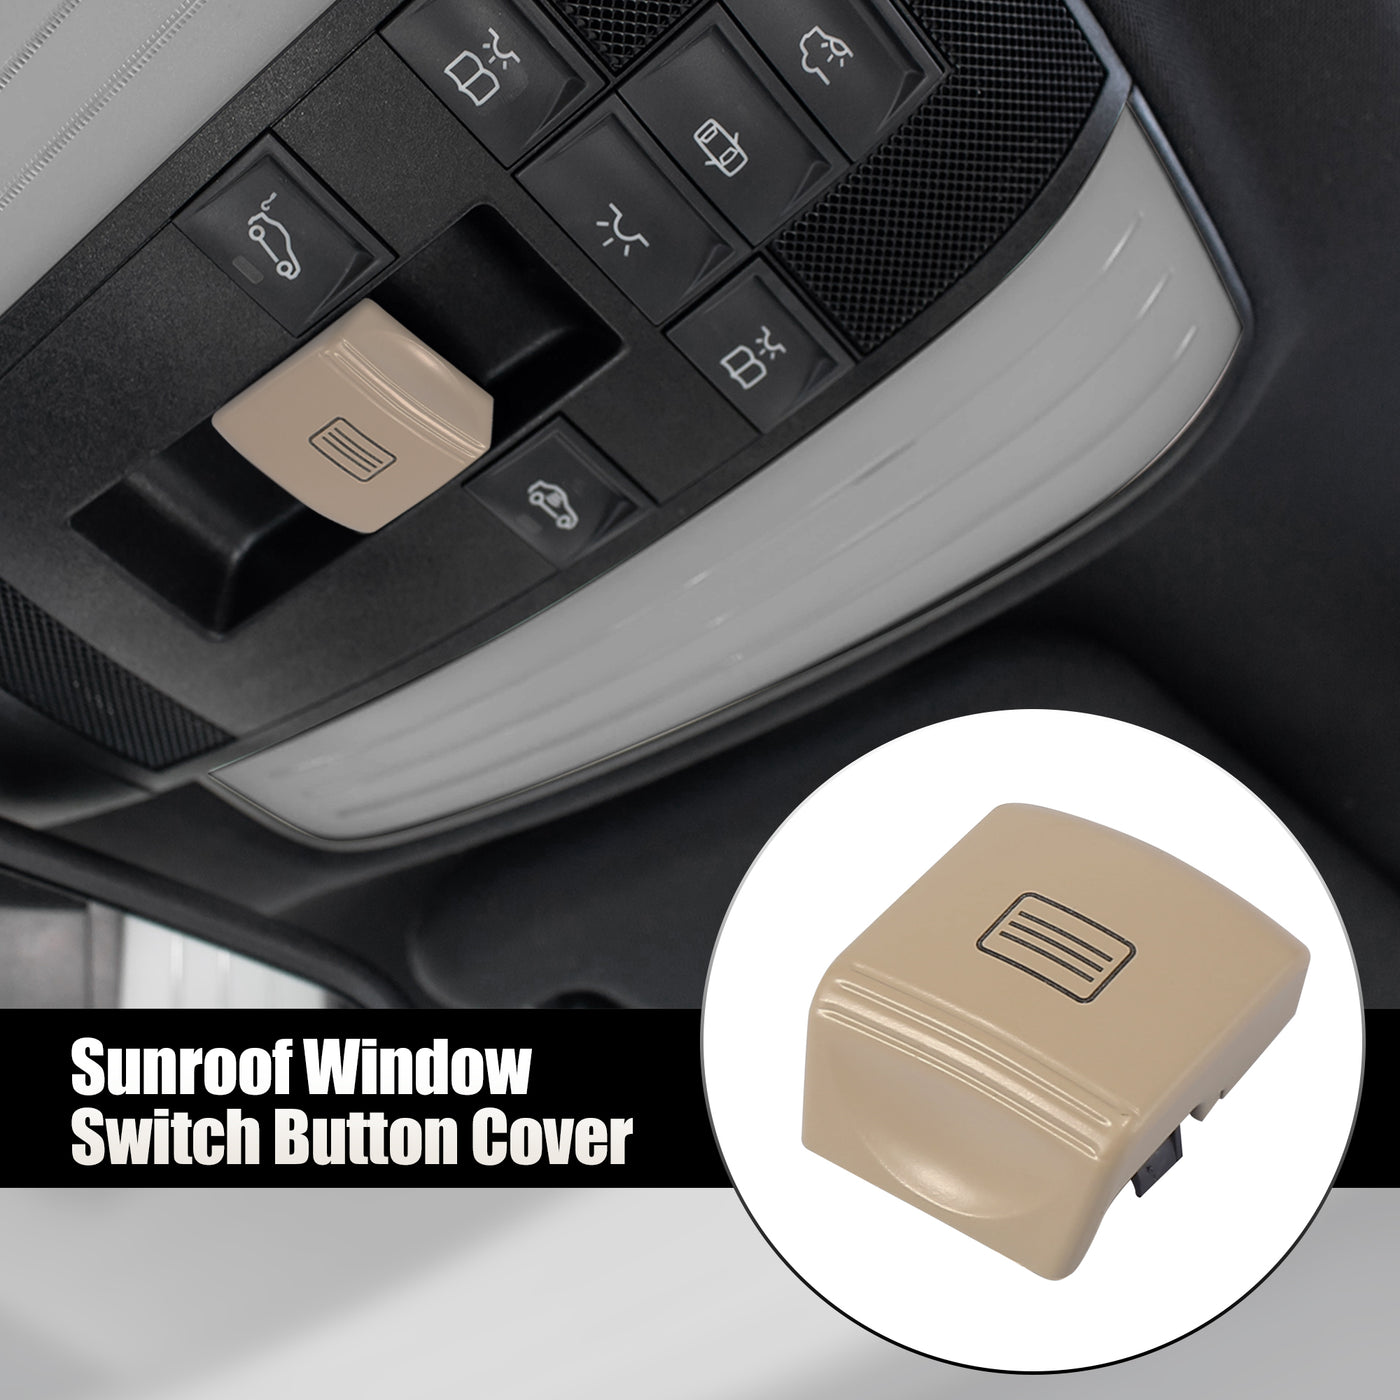 X AUTOHAUX Car Sunroof Window Switch Button Cover Sunroof Switch Cover Beige for Mercedes-Benz C-Class W204 E-Class W212 C207 CLS-Class W218 C218 Replace